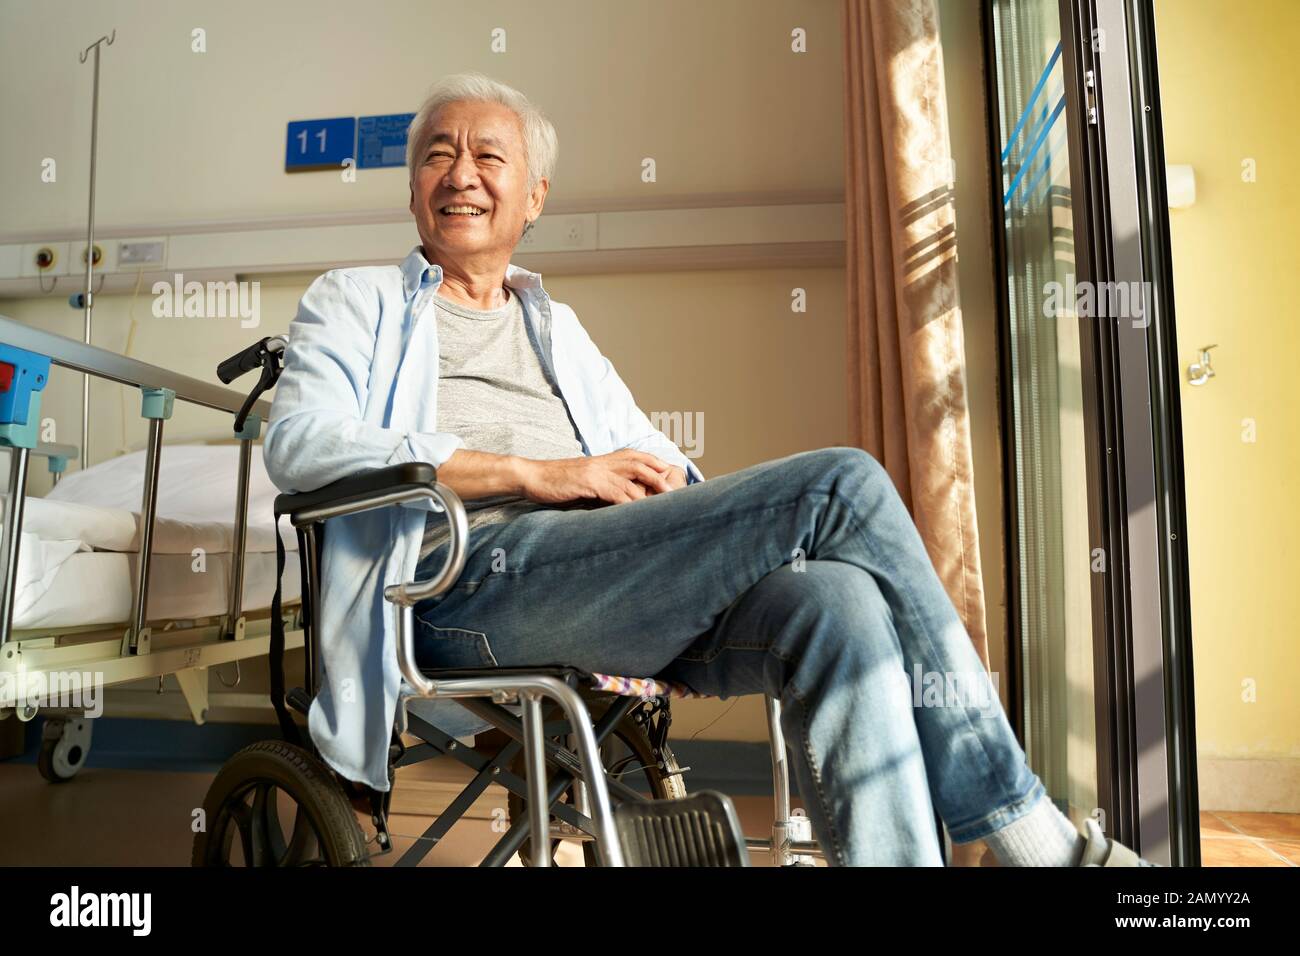 asian old man sitting in wheel chair in nursing home or hospital ward looking happy and content Stock Photo